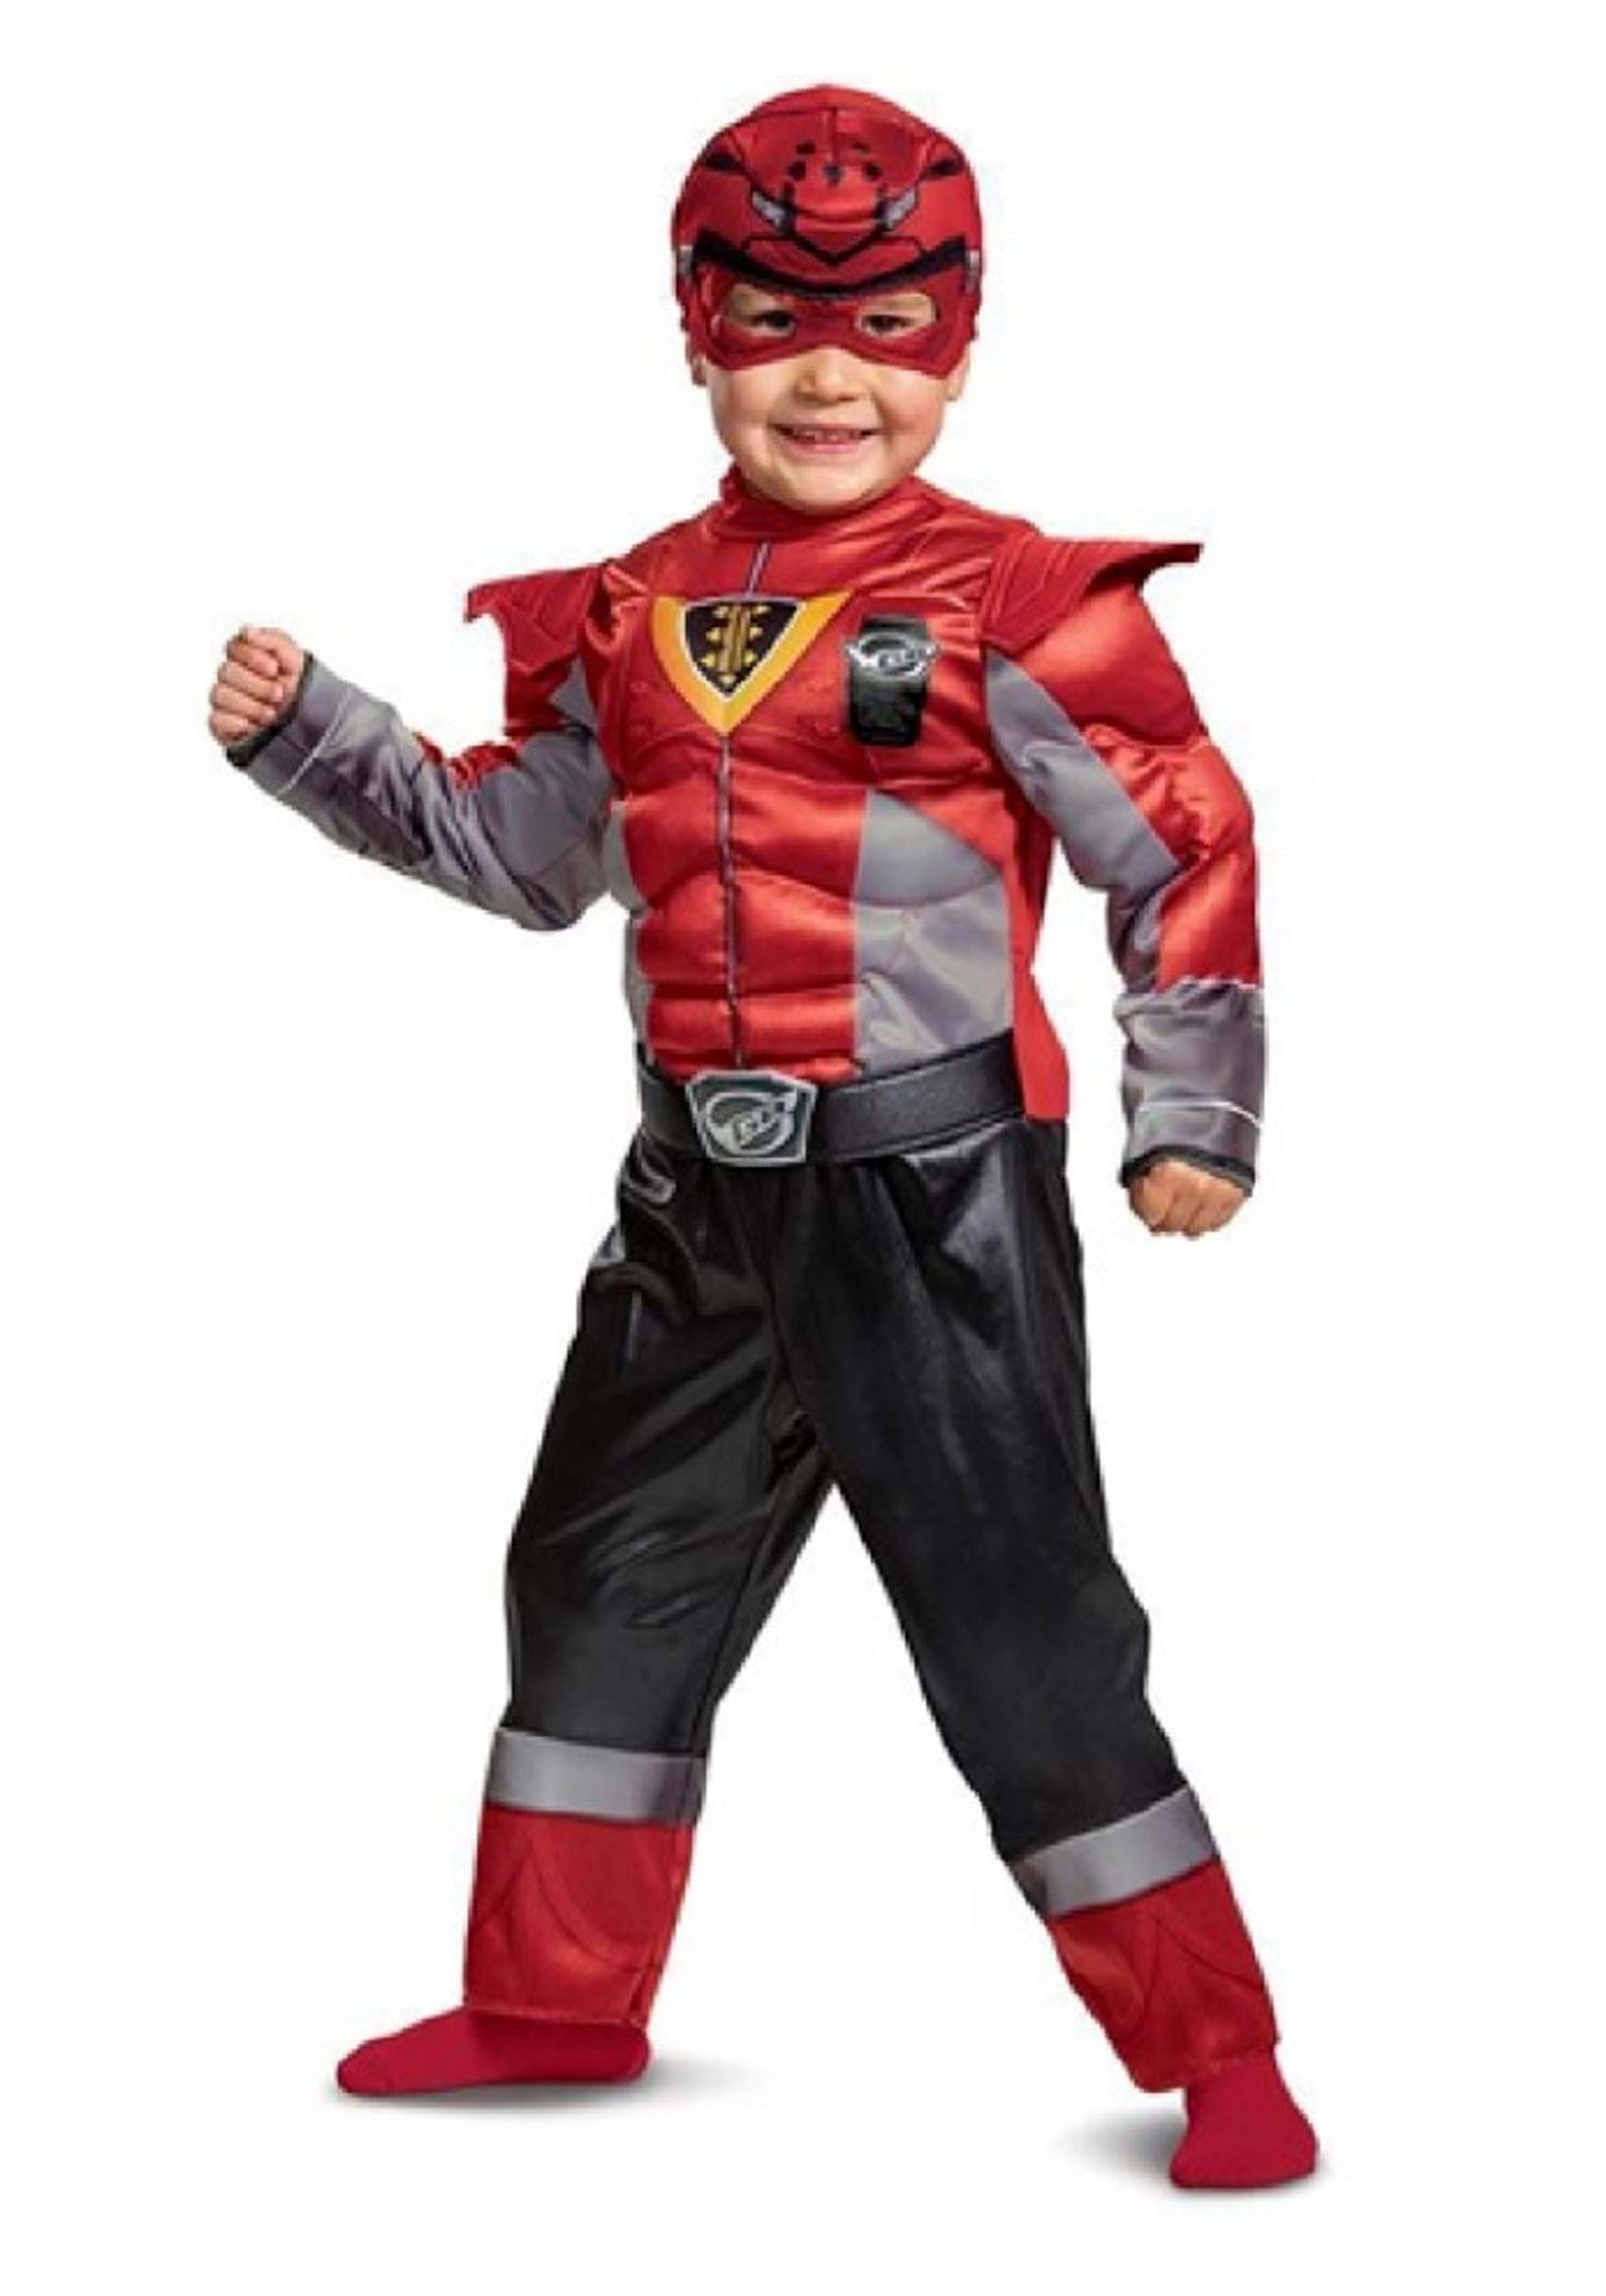 Photos - Fancy Dress Redpower Disguise Disguise Red Leader Power Ranger Toddler Costume Black/Gray&# 